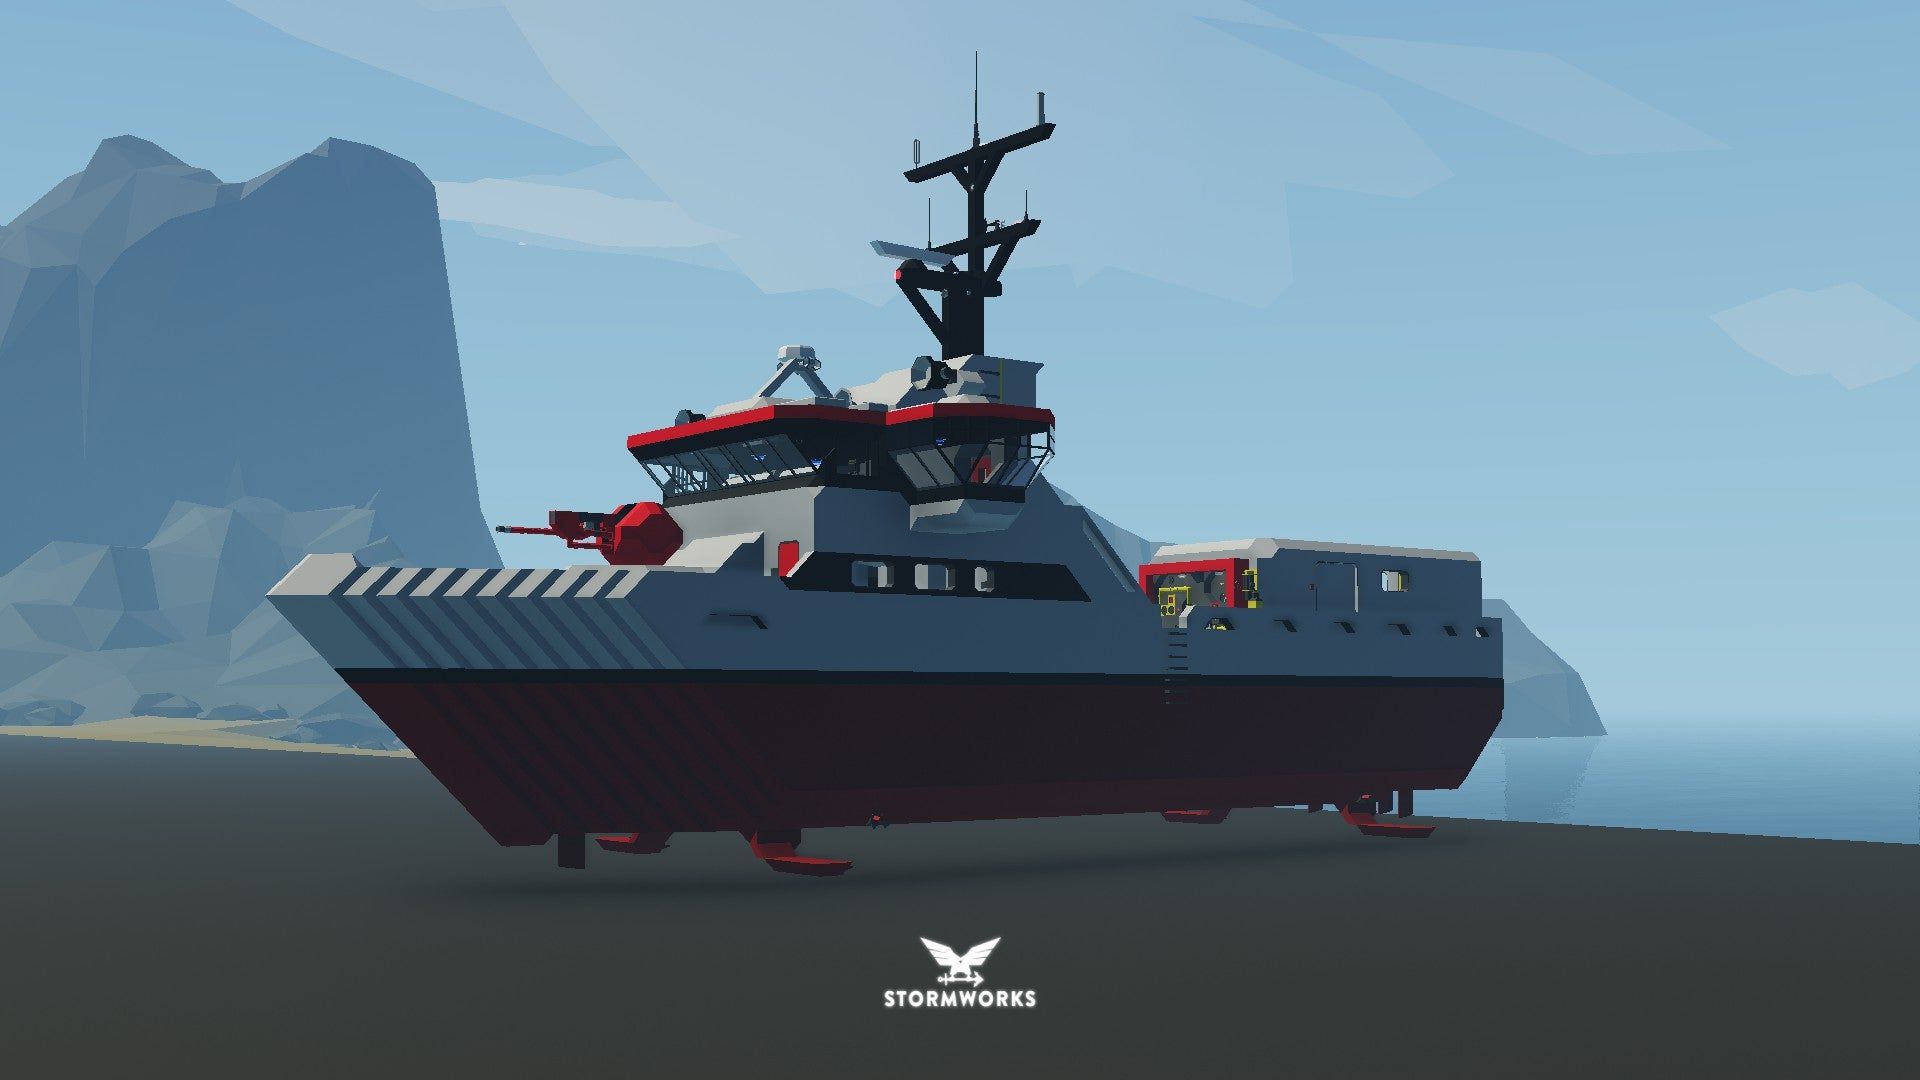 WIP My first ever ship build for stormworks, a multipurpose ship with big water canon for fire fighting needs and a top speed of 50 knots. What should i name her?